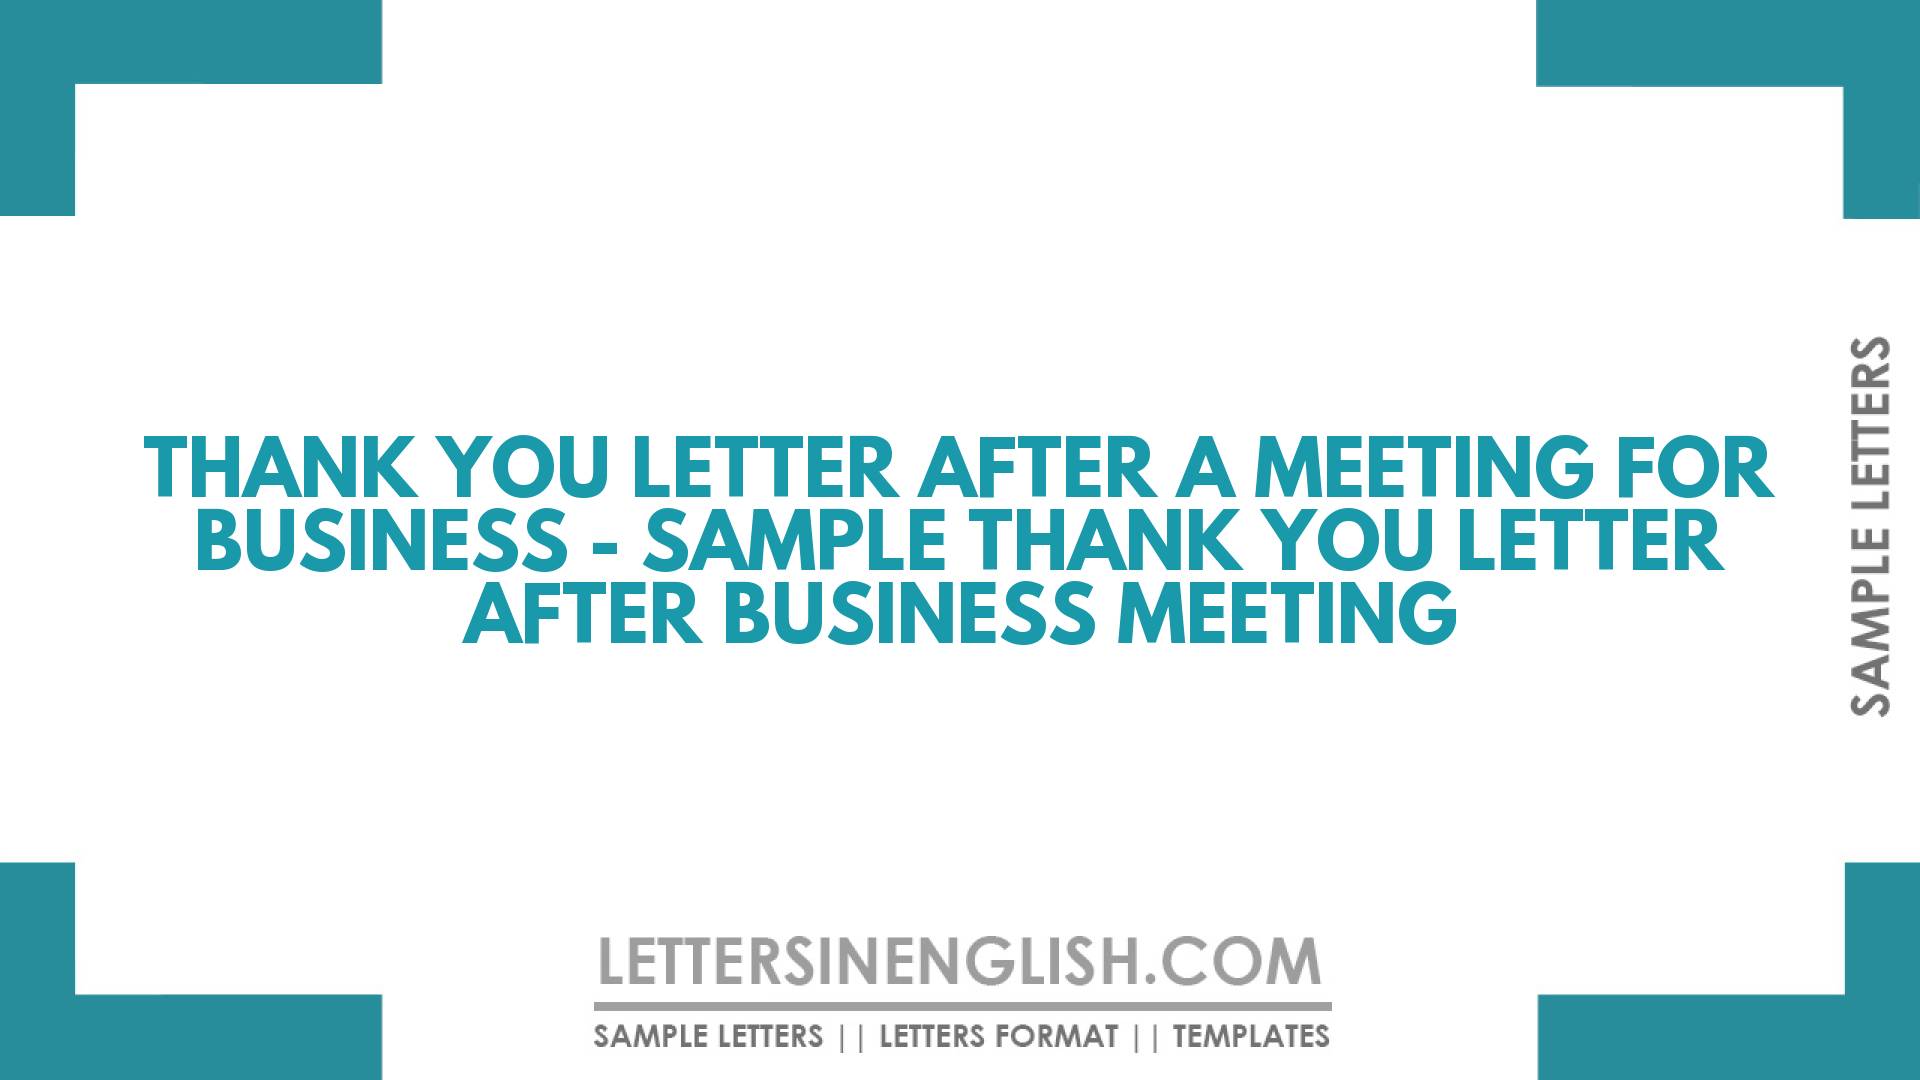 Thank You Letter After a Meeting for Business – Sample Thank You Letter After Business Meeting